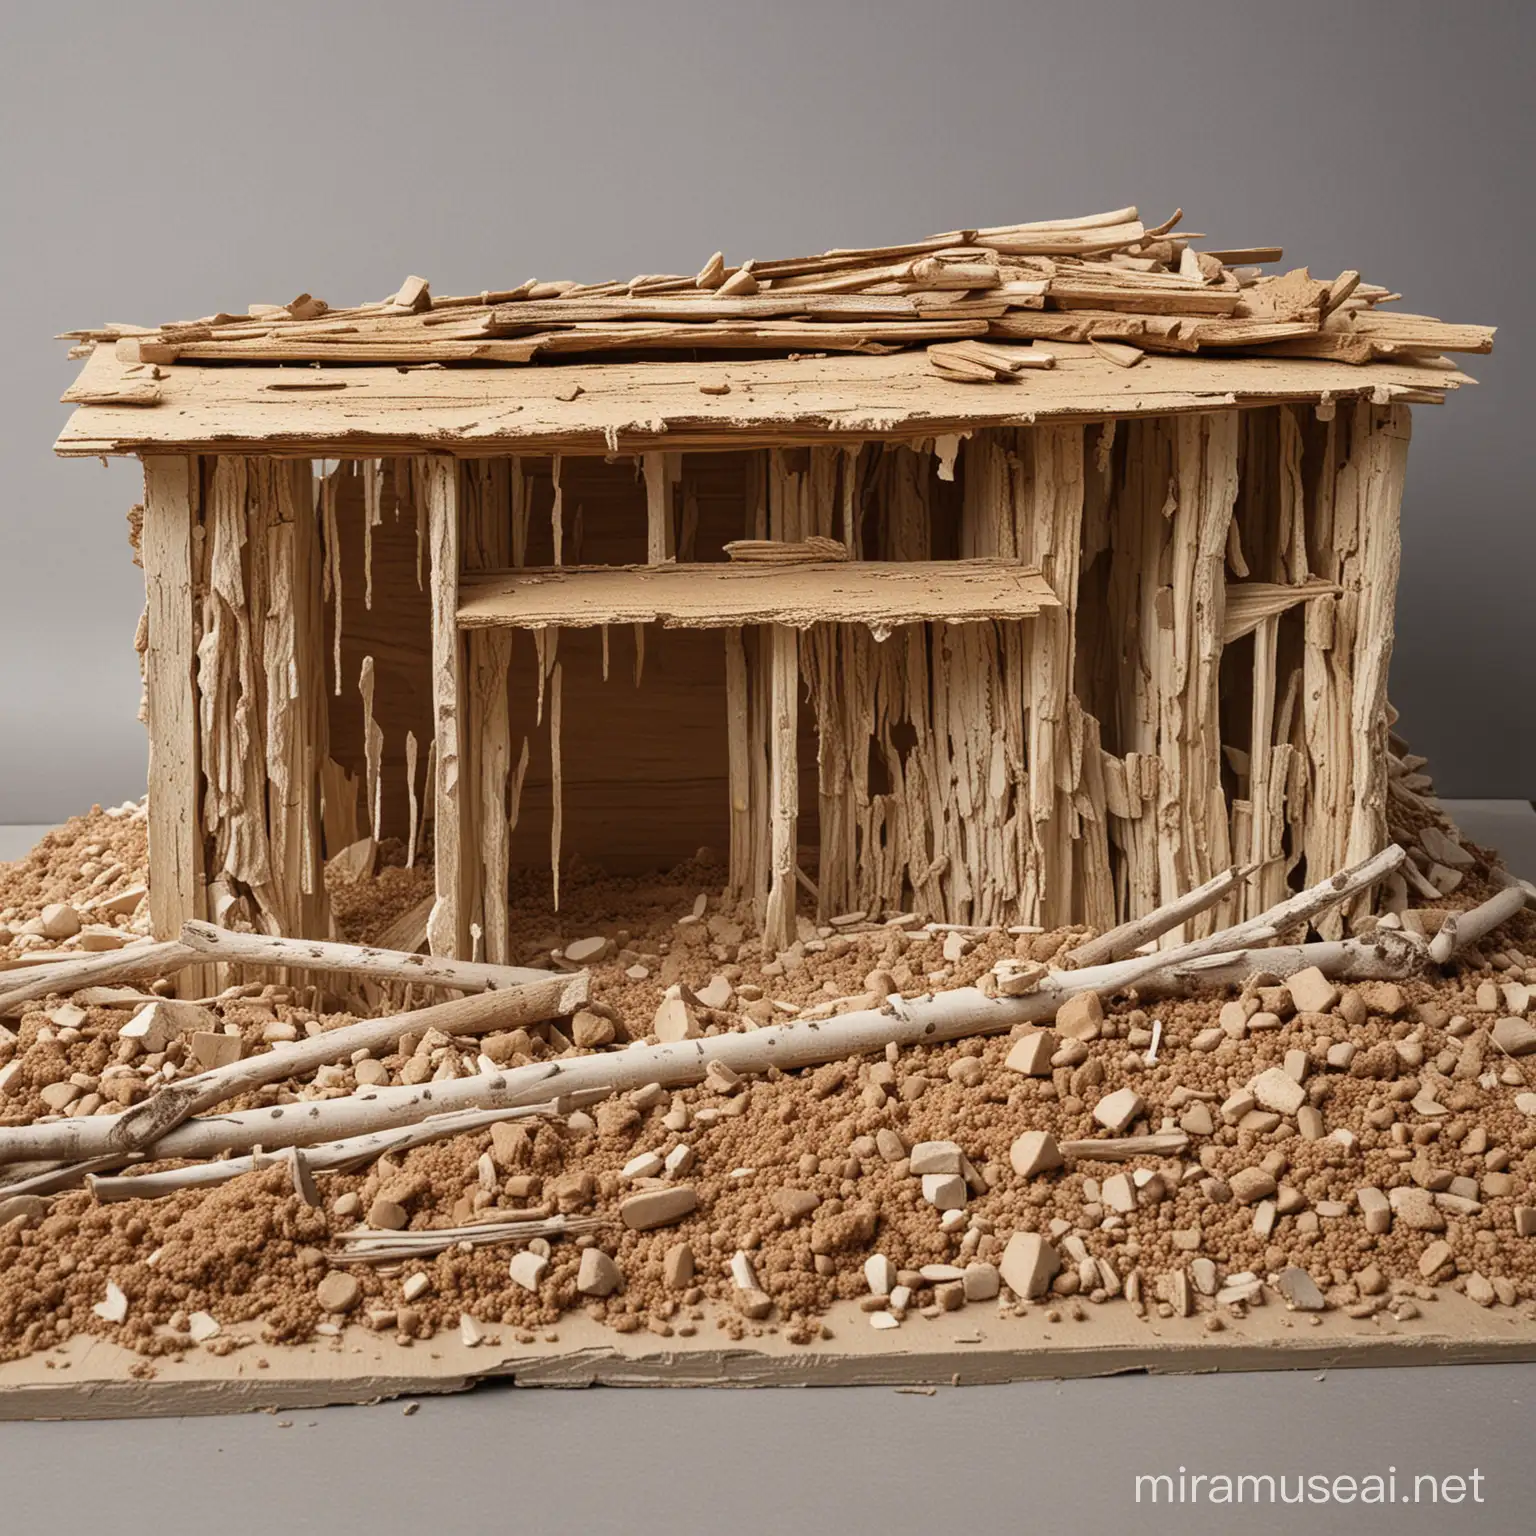 RippedUp Timber House Gap Replica with Layered Materials